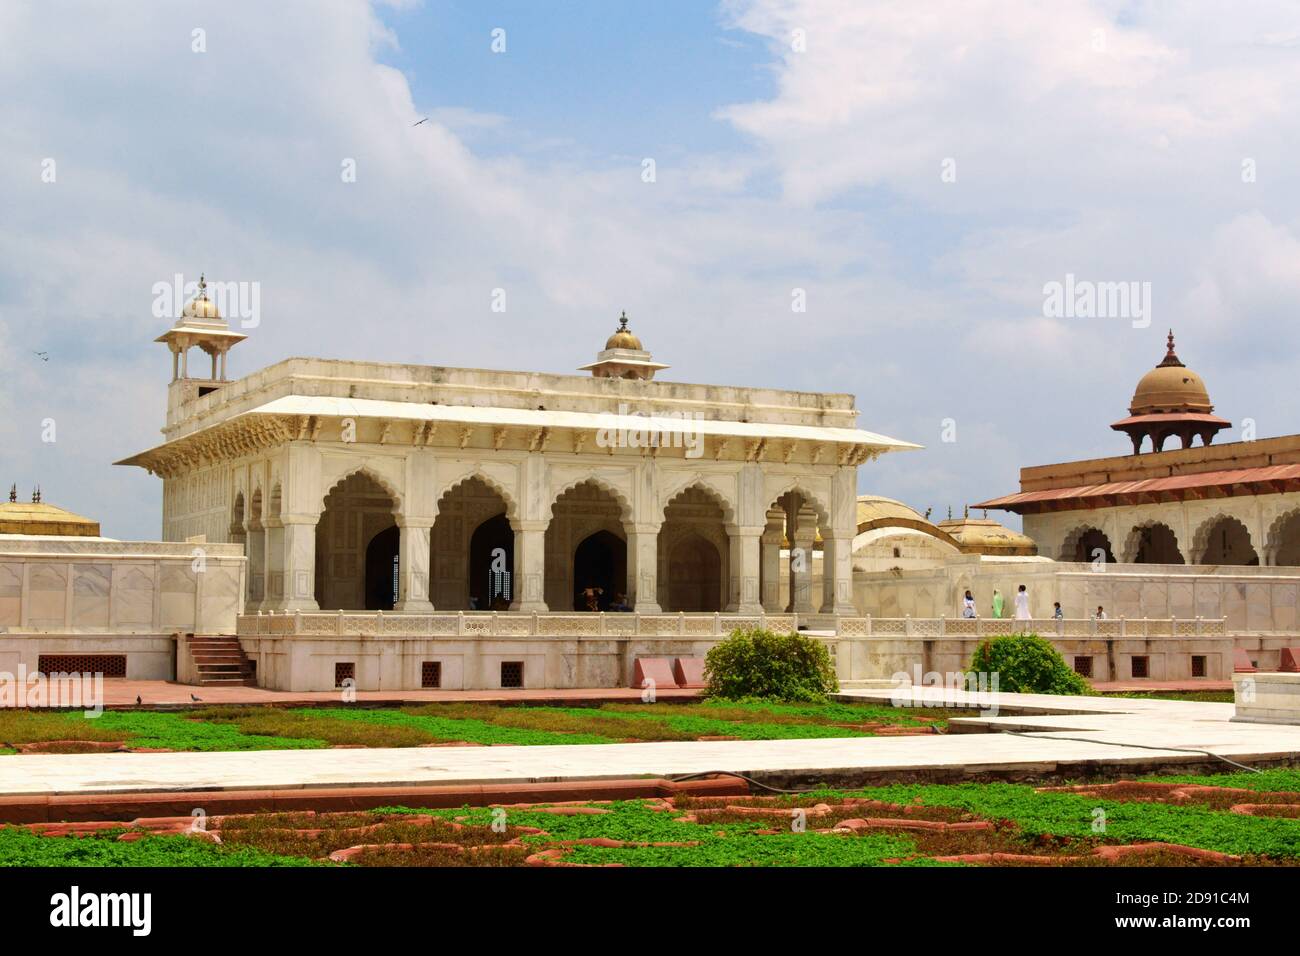 Agra, India - August 18, 2016: Khas Mahal covered by white marble was the palace of the emperor inside Agra Fort in Agra, Uttar Pradesh, India. Stock Photo